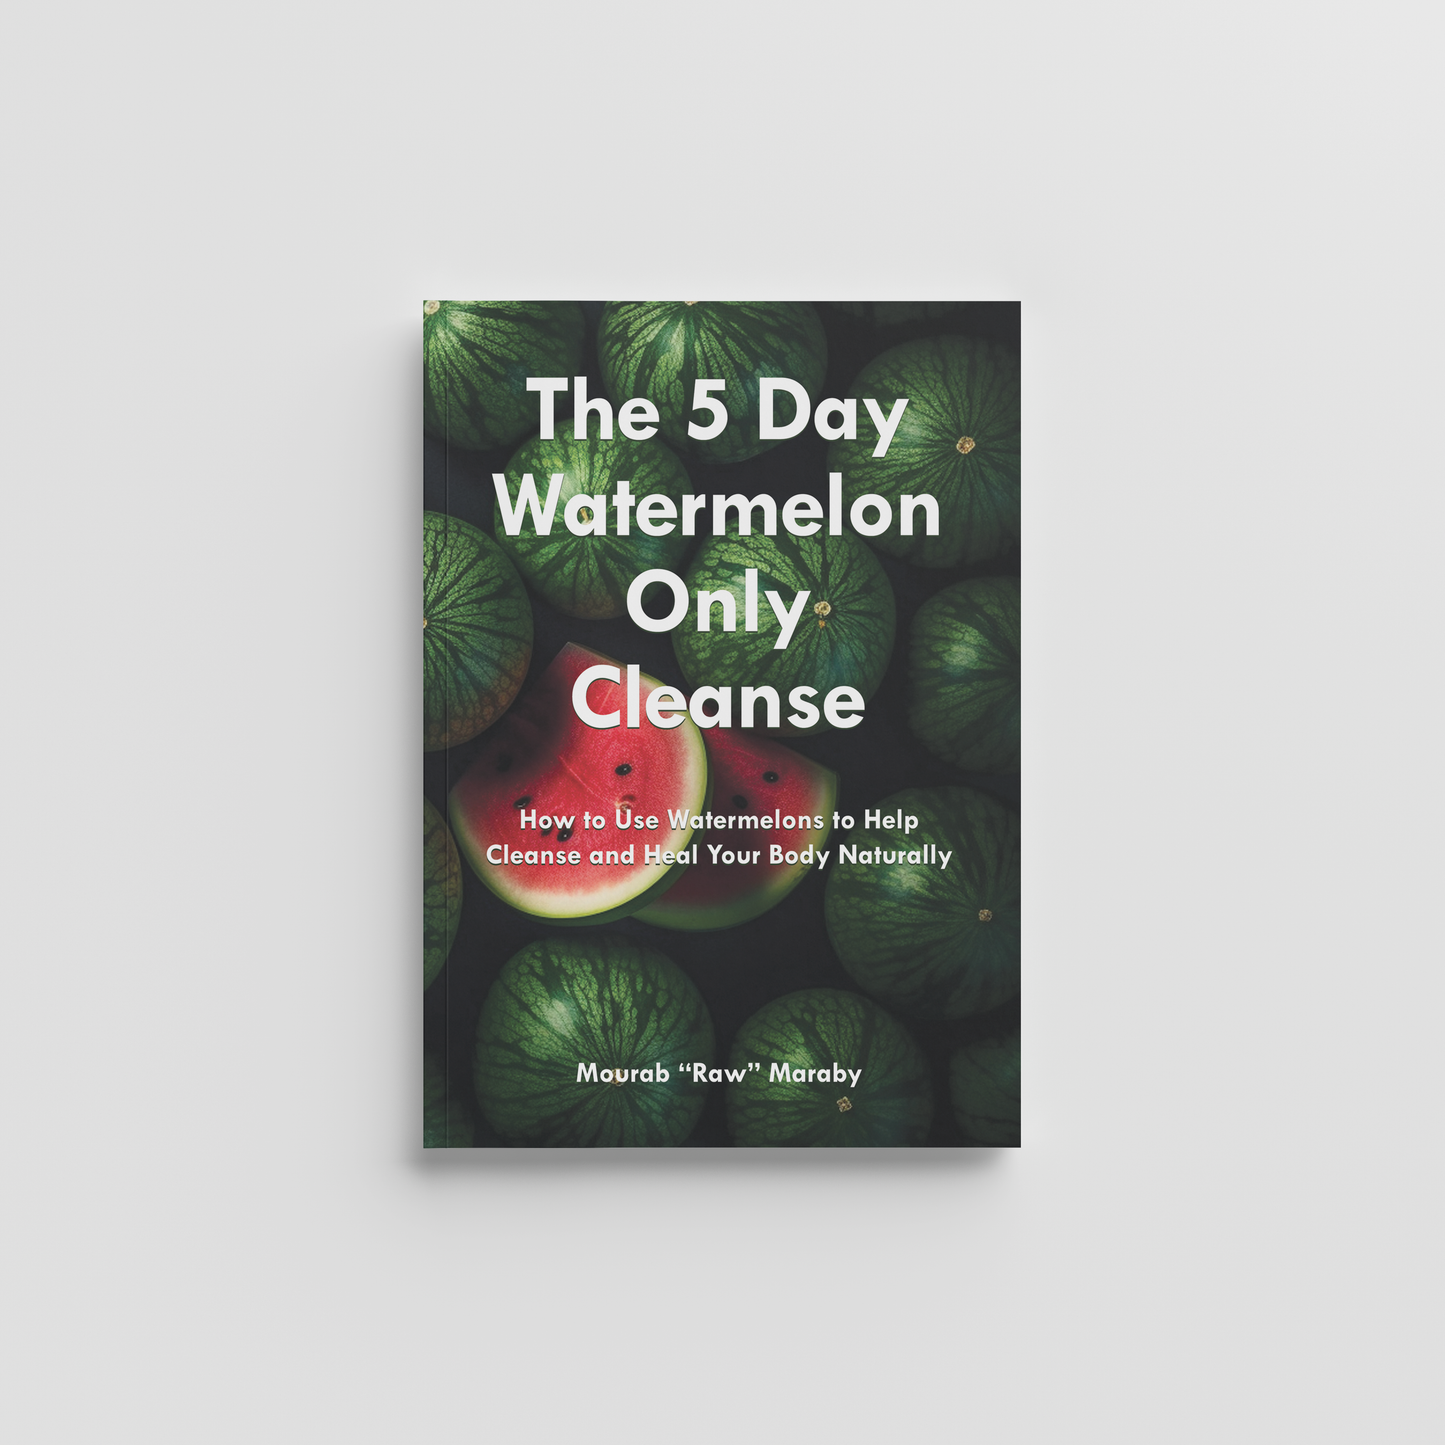 The 5 Day Watermelon-Only Cleanse